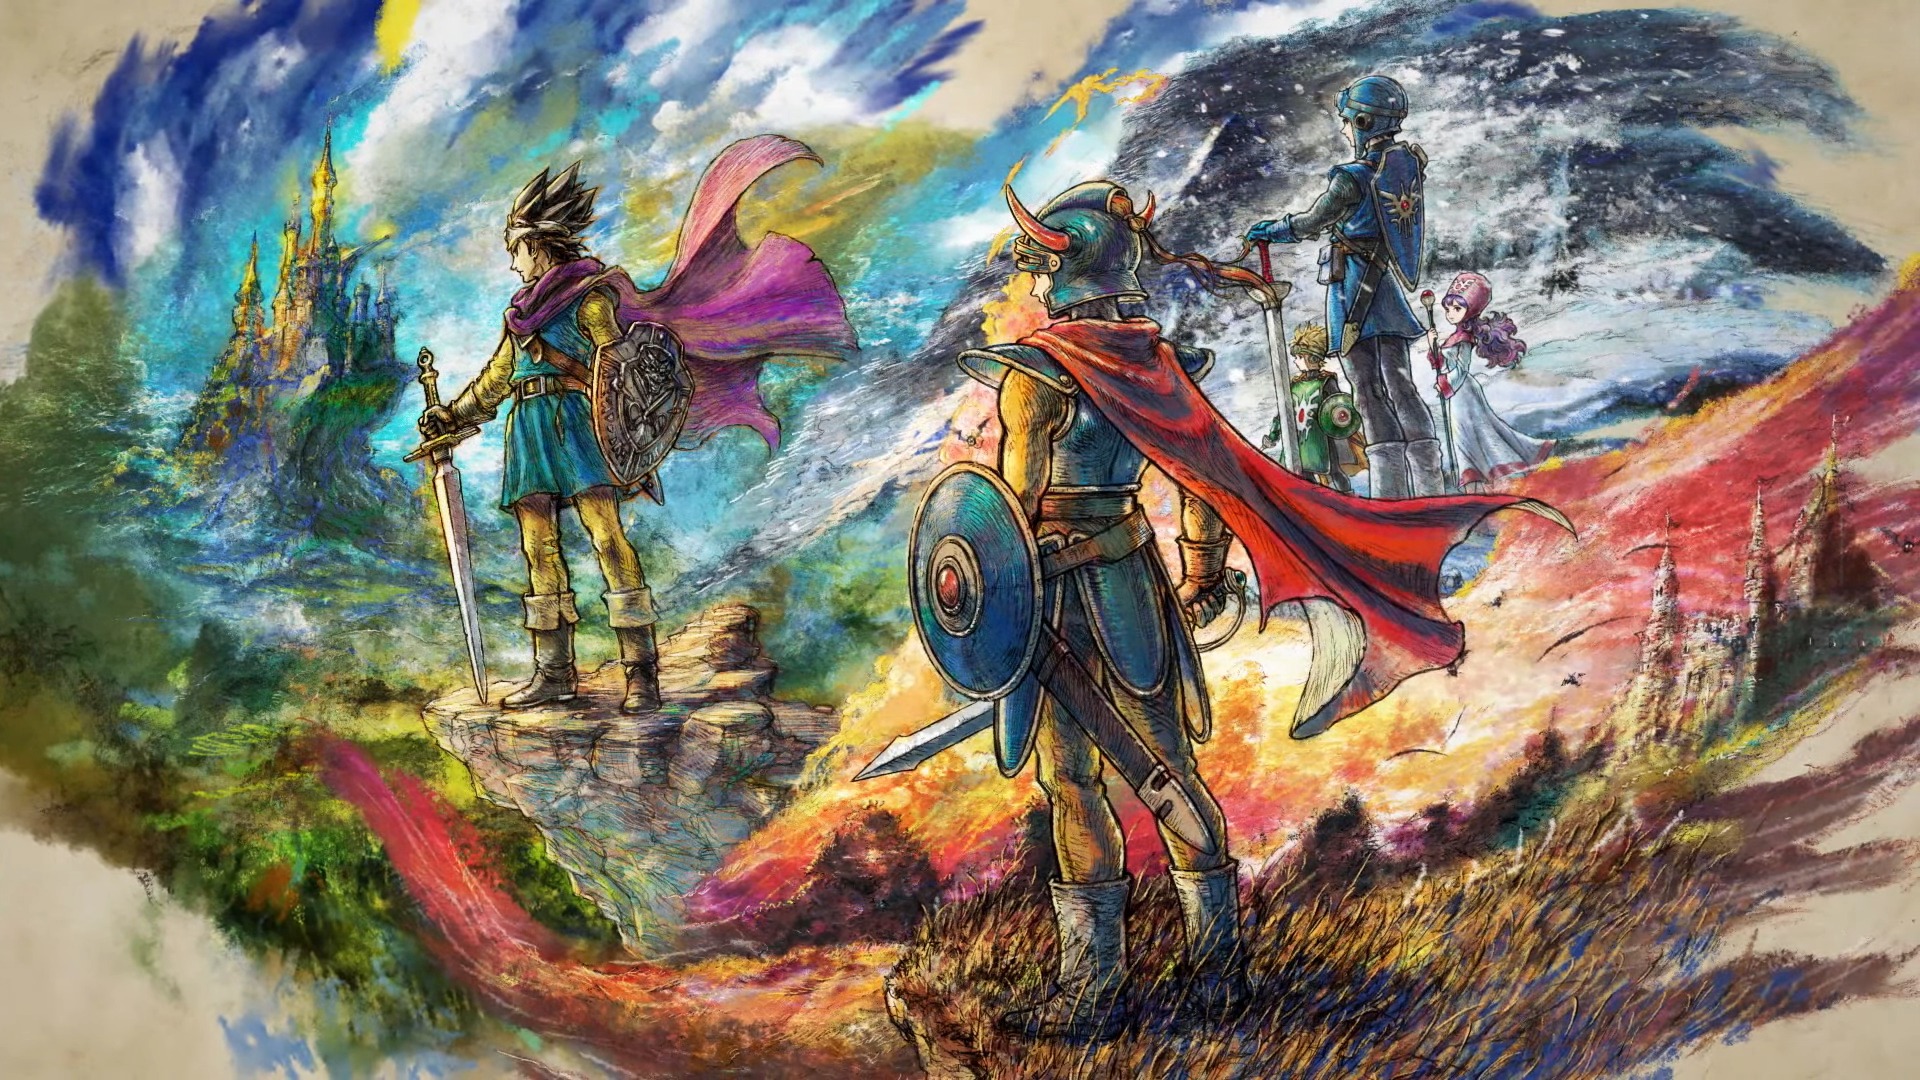 Artwork of the heroes from Dragon Quest 1, 2, and 3 presented in a sketchy, watercolor style 